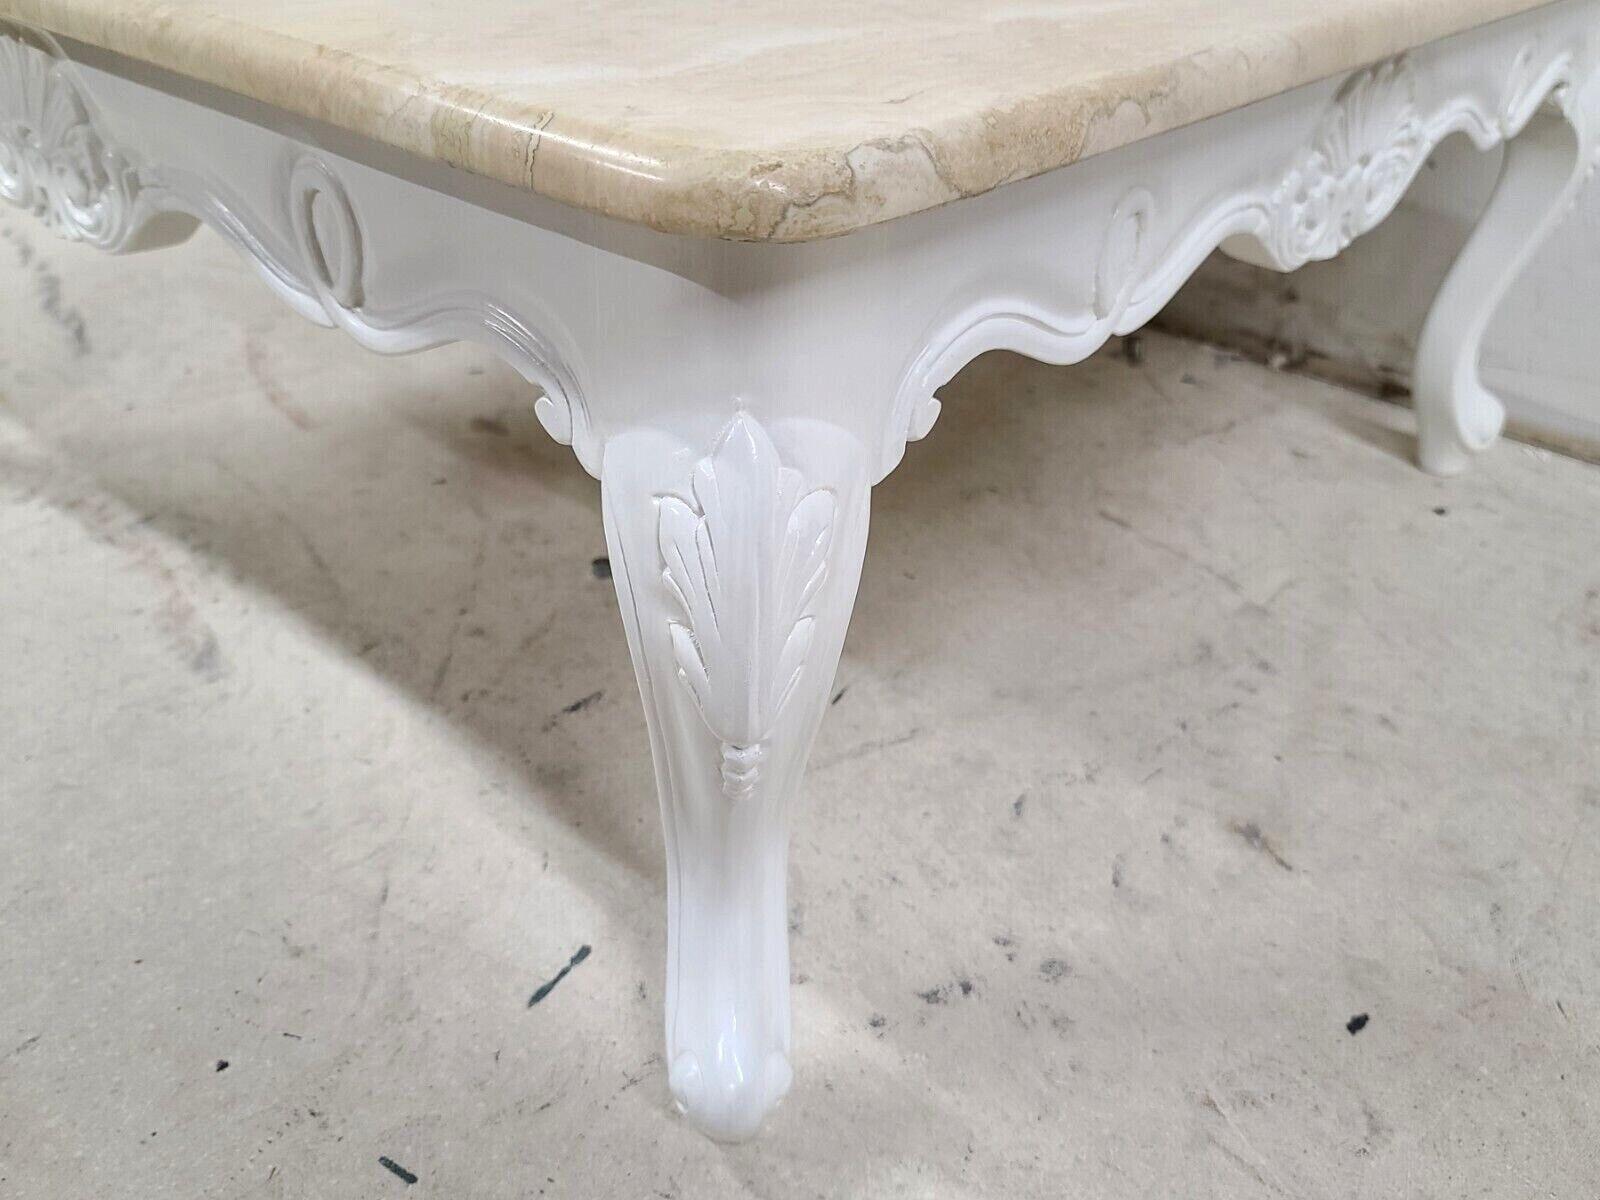 coffee table french provincial